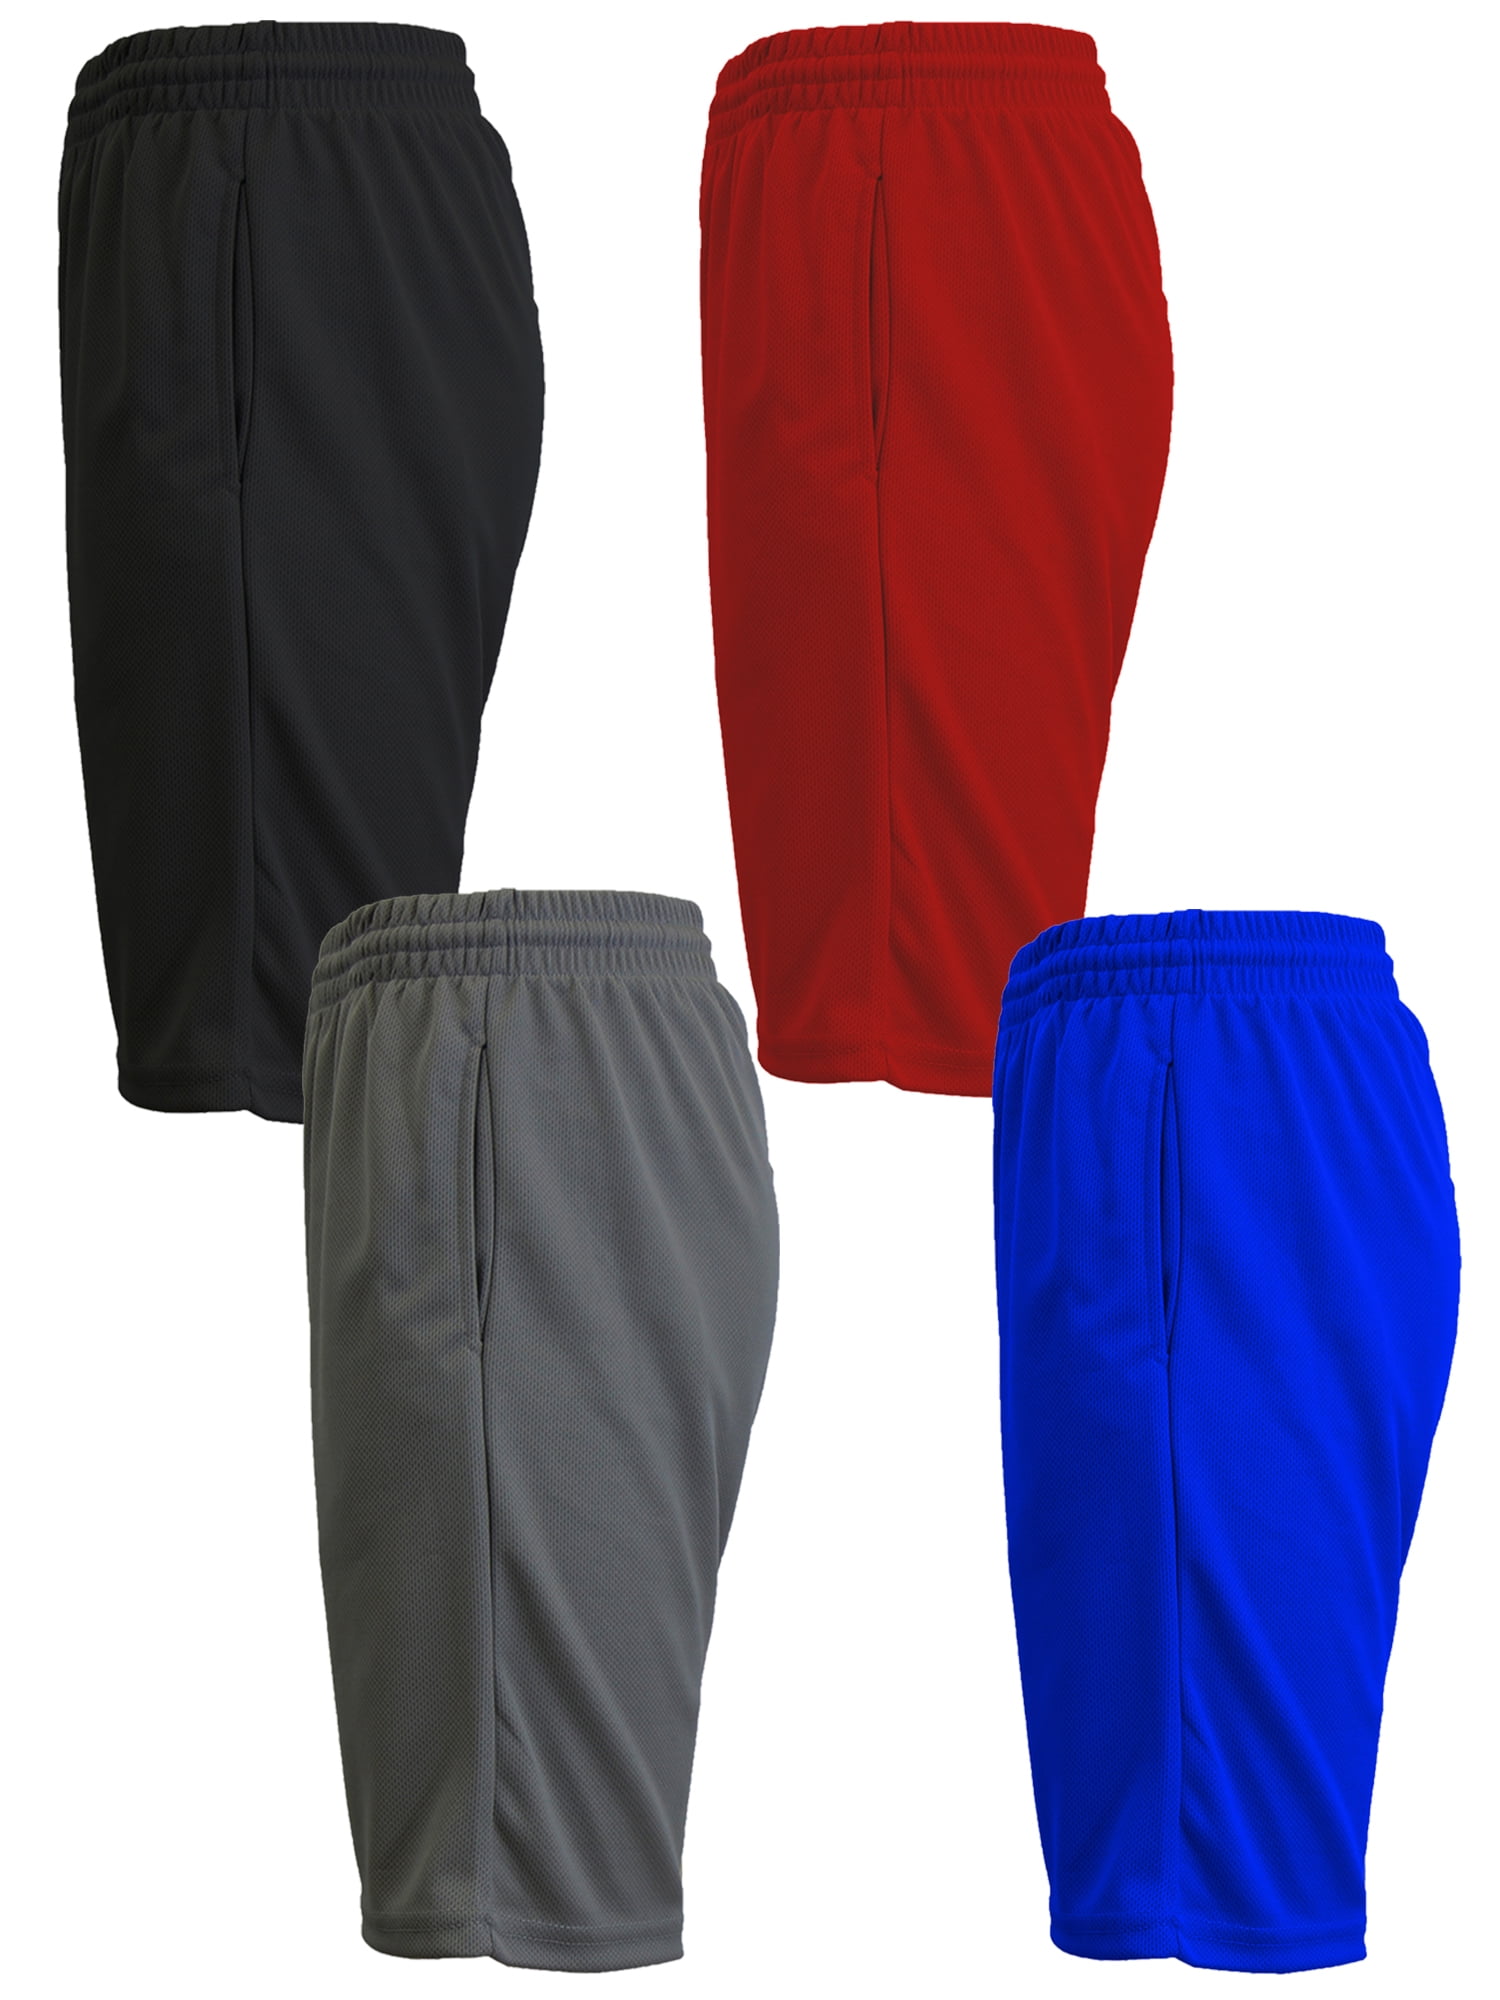 DRI-Equip Youth Moisture Wicking All Sports Shorts in 8 Colors